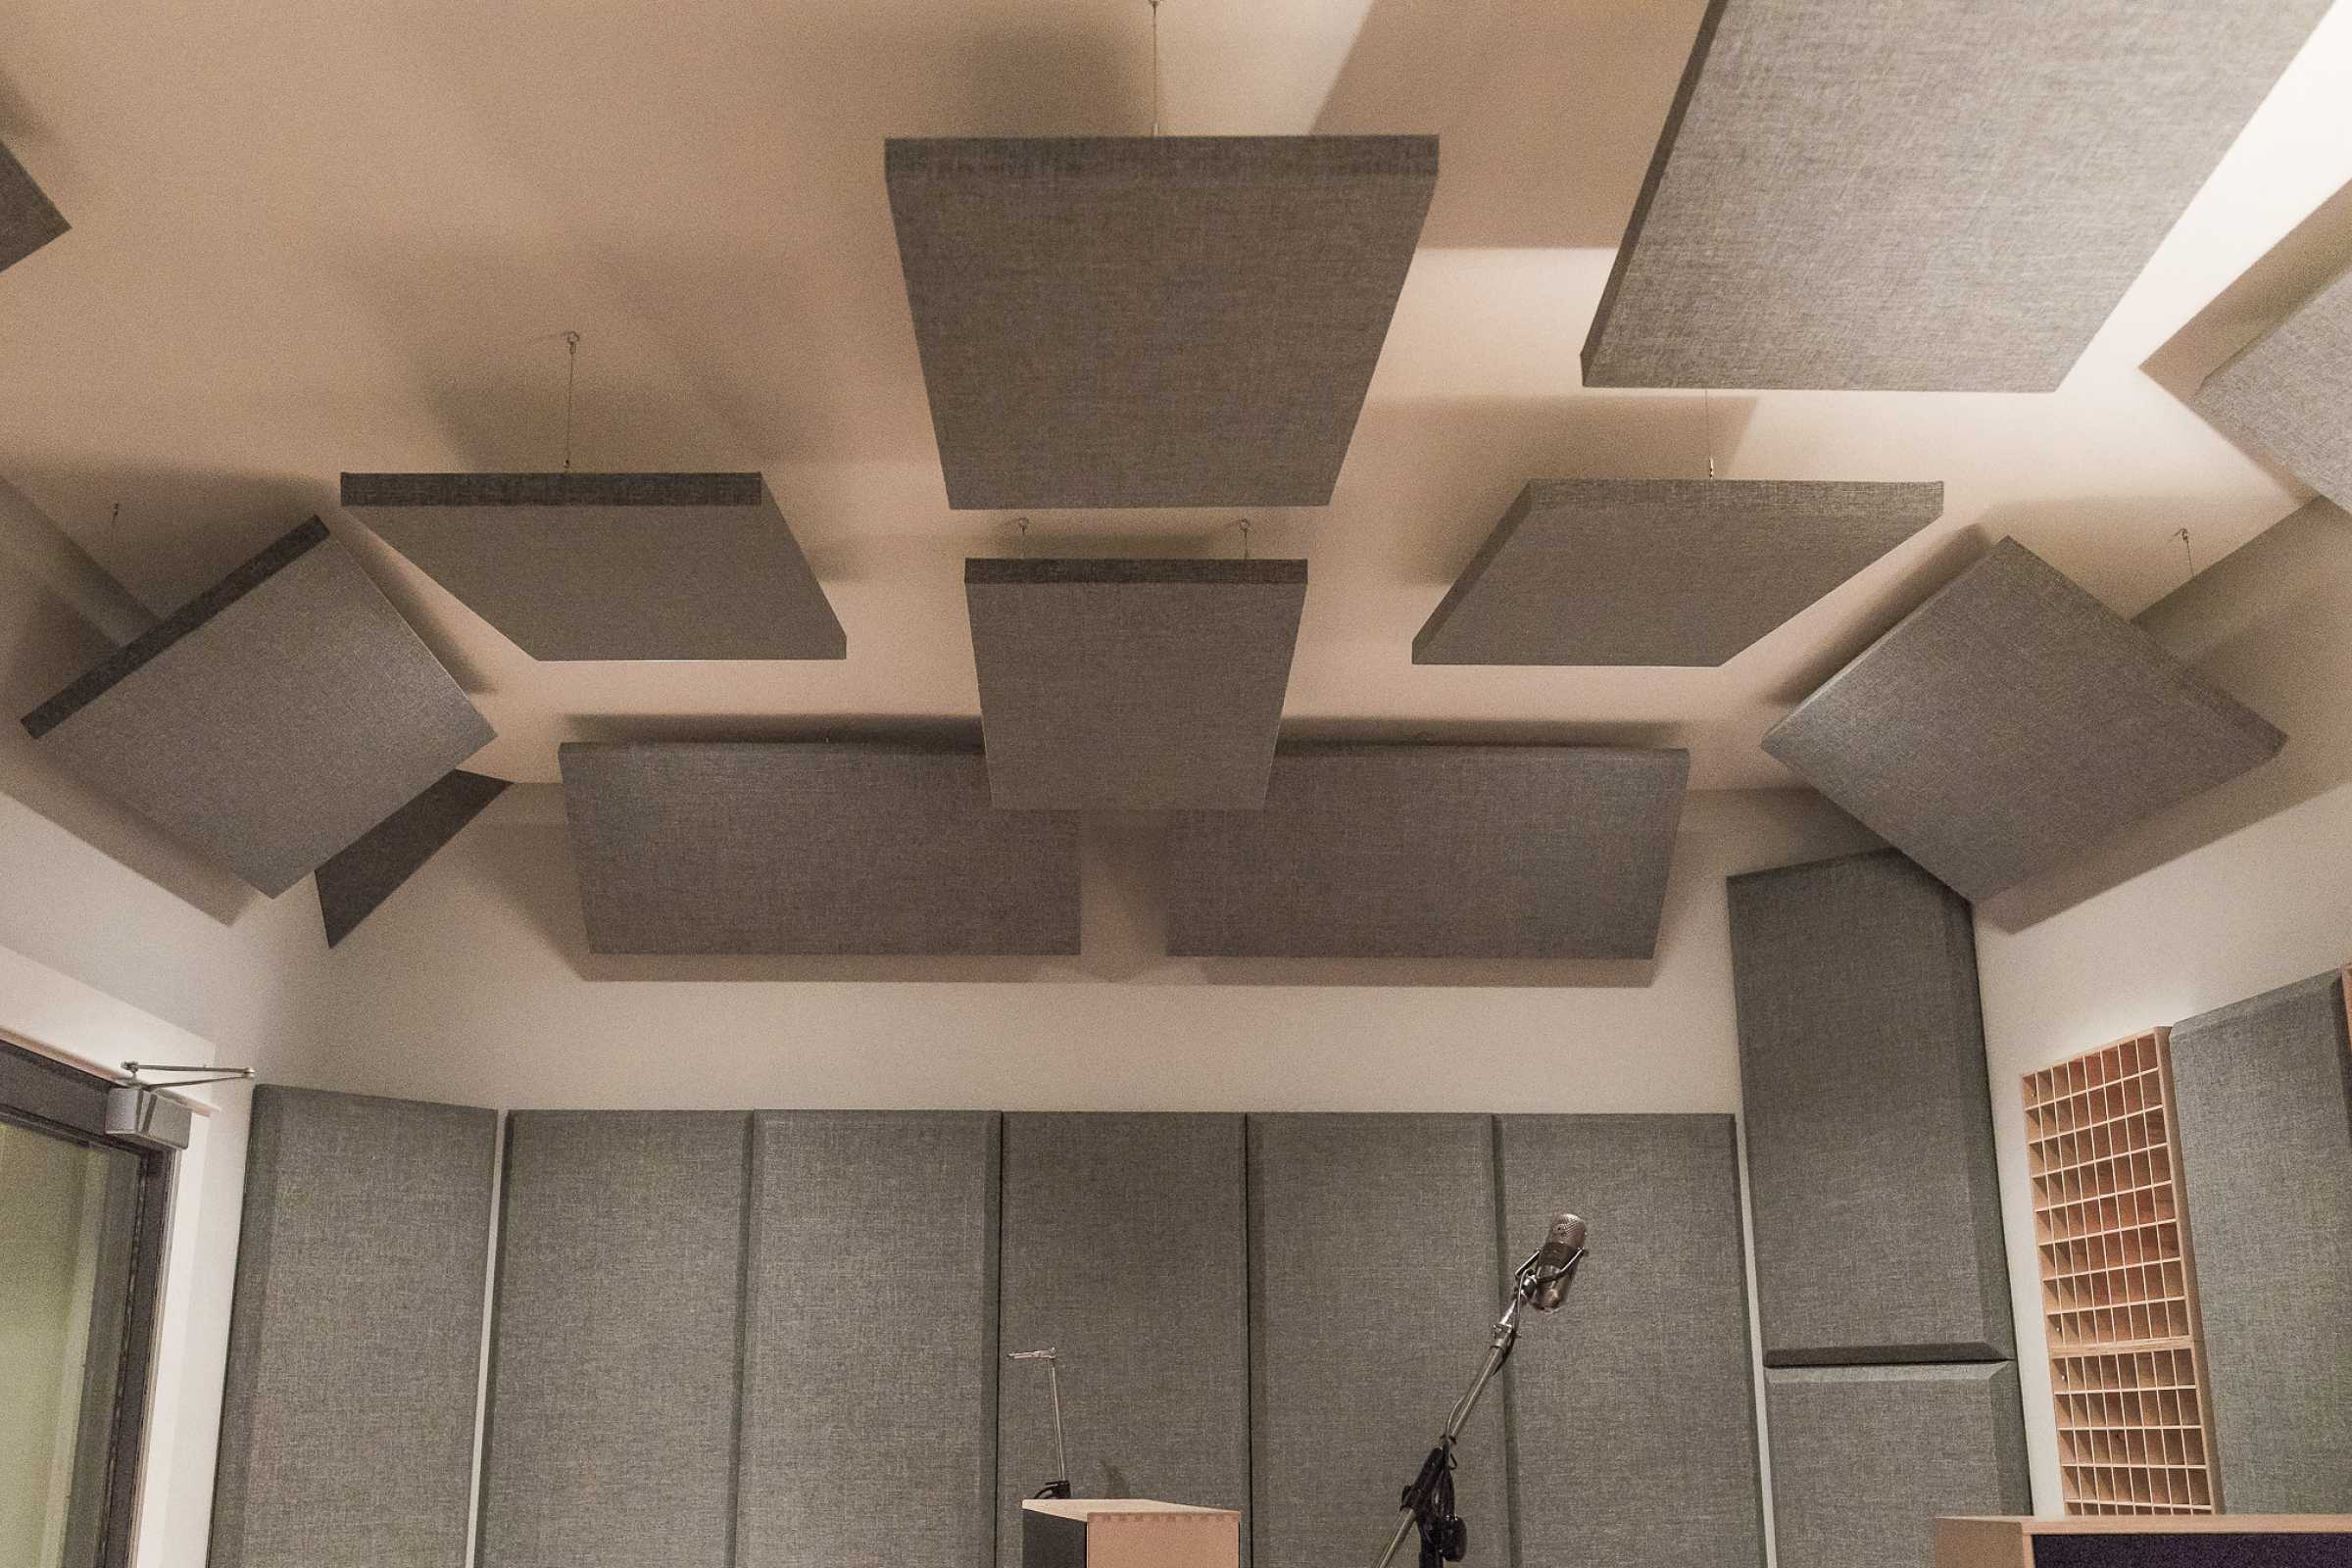 Recording studio ceiling with grey hanging acoustic panels